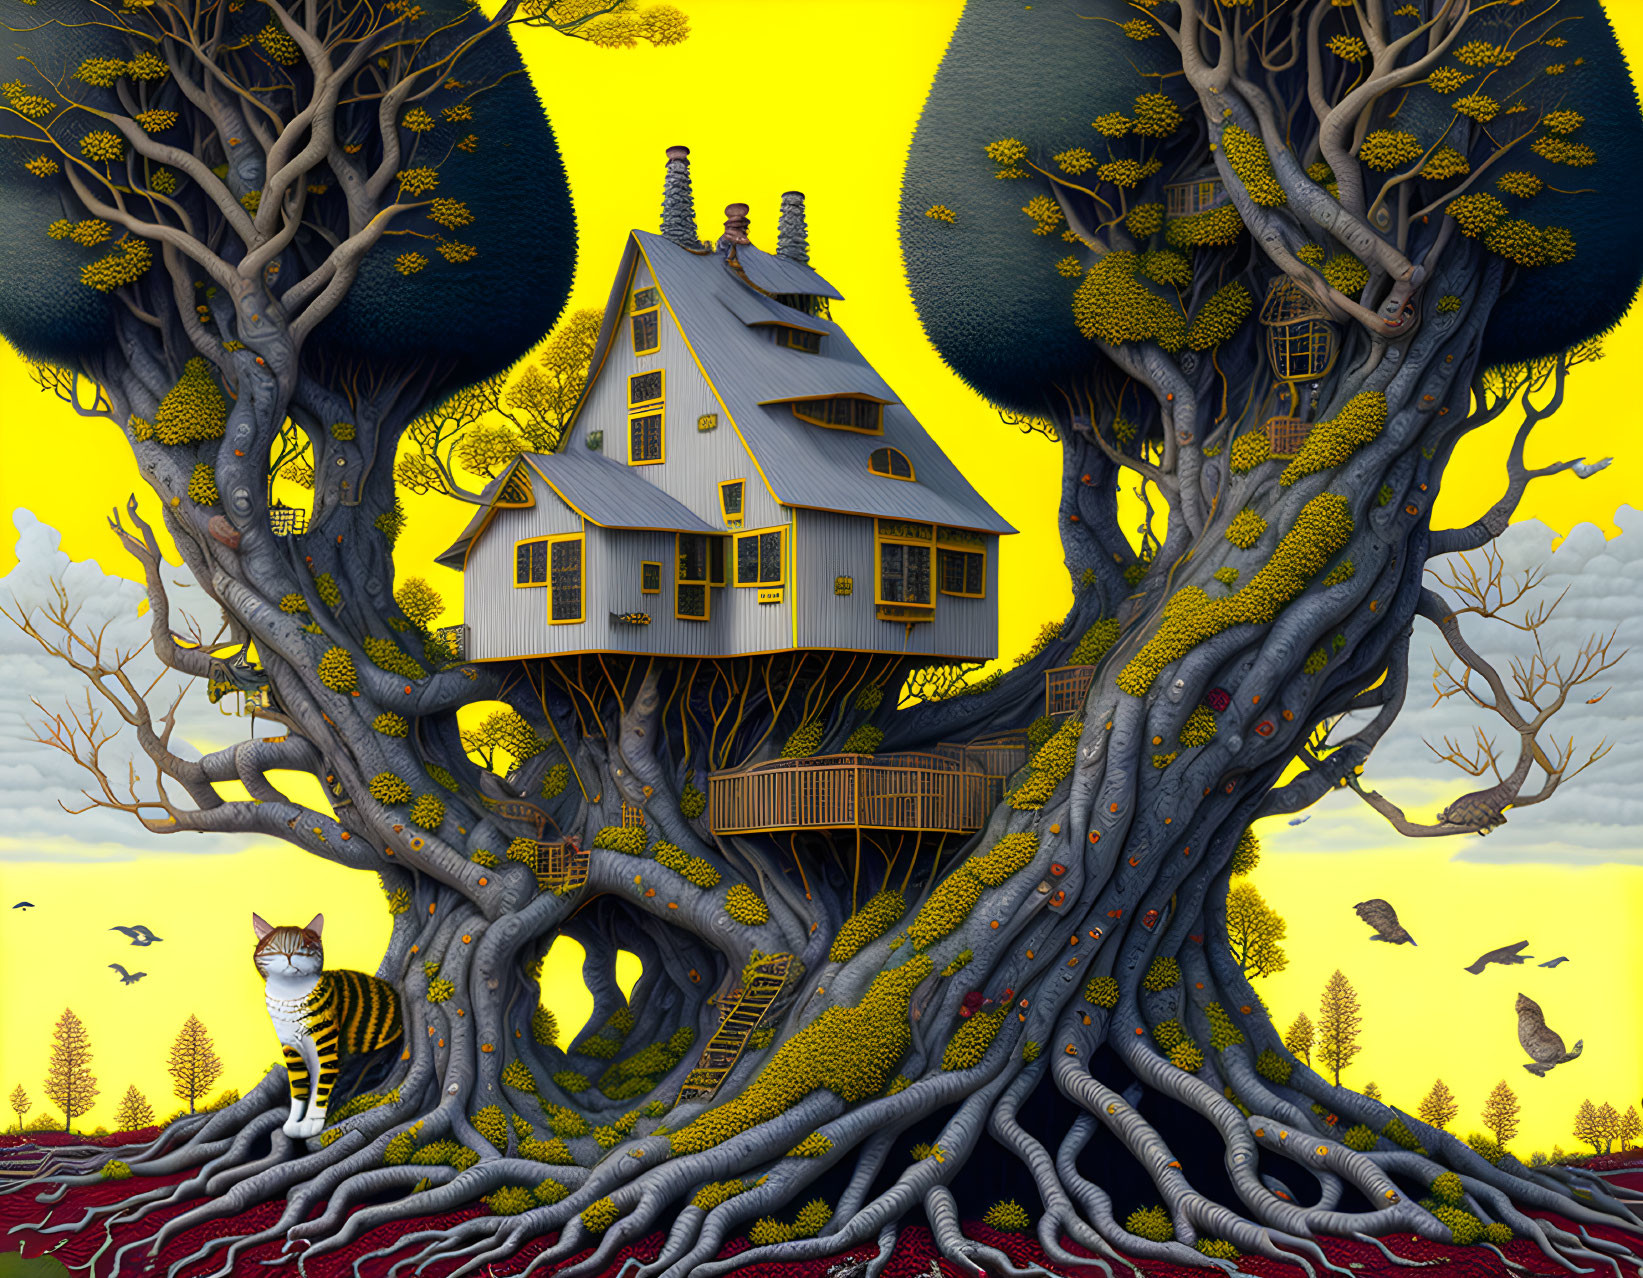 Yellow treehouse with intricate roots, striped cat, birds, and large trees